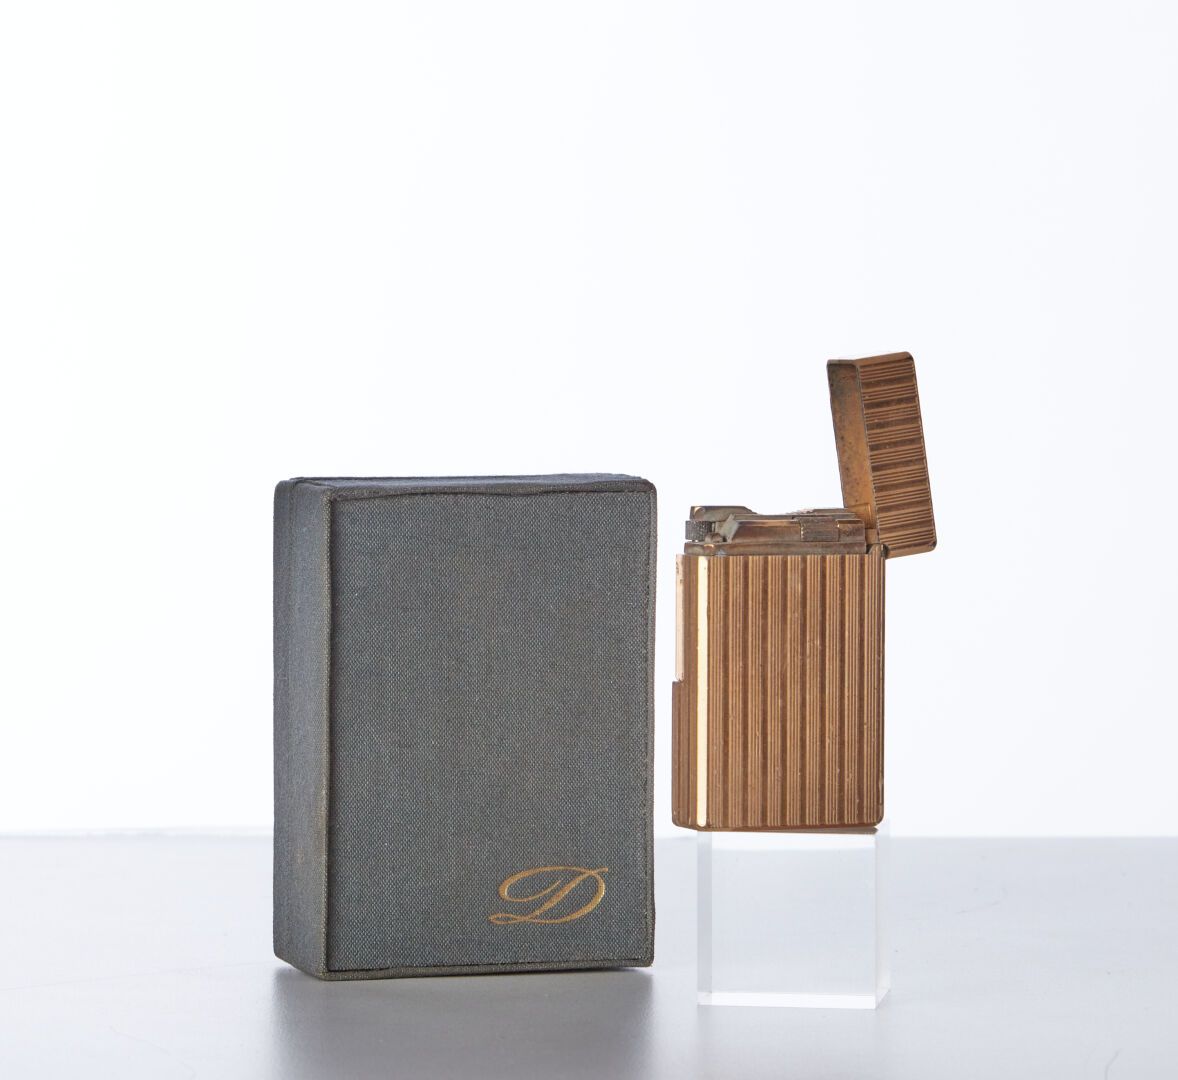 Null DUPONT

A gilded metal lighter in its original box